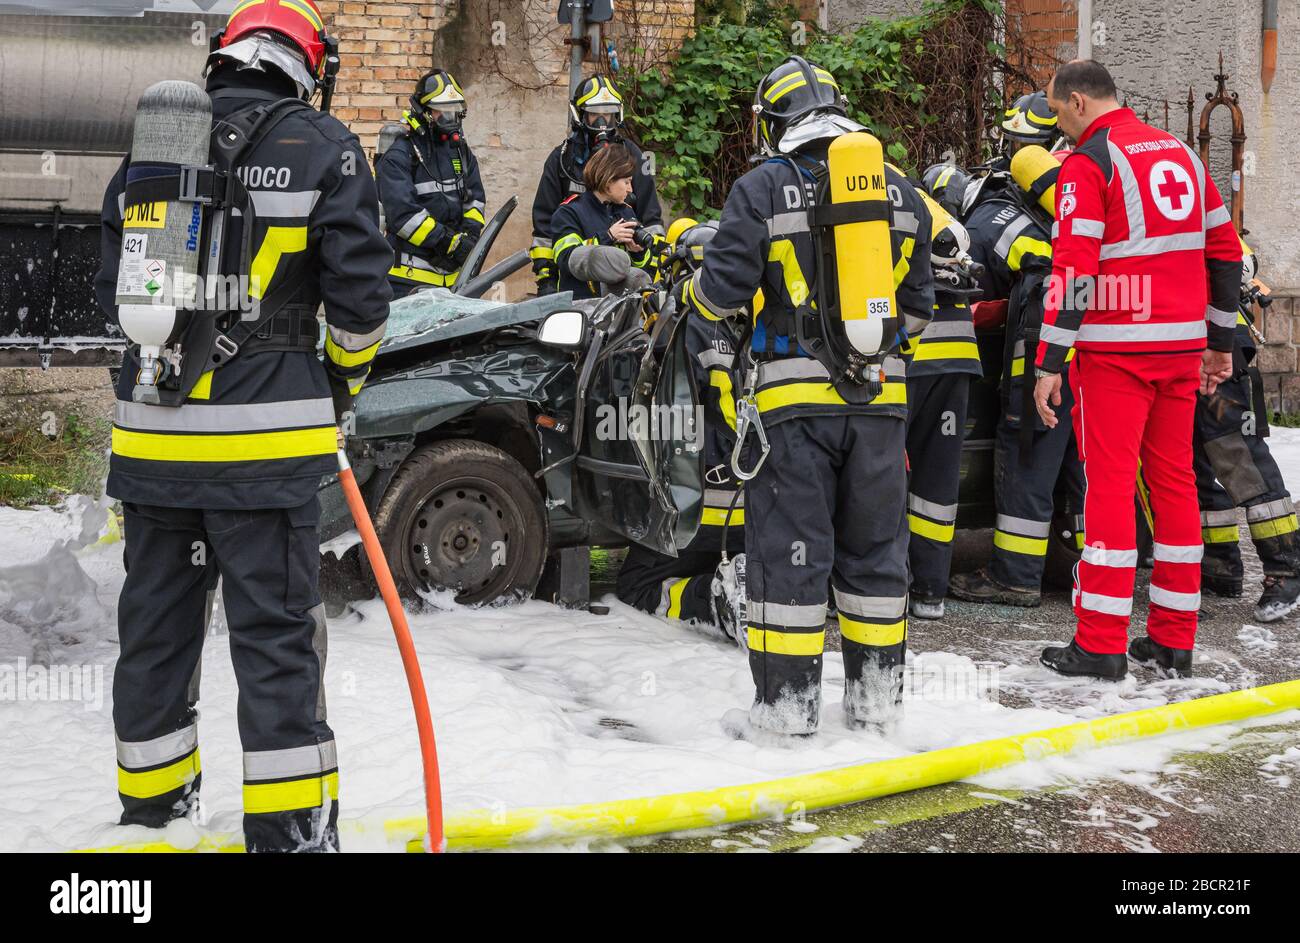 firefighters crewss rescue trapped driver during a road accident simulation with cars, train and trucks. firefighters with Breathing Apparatus and Hyd Stock Photo